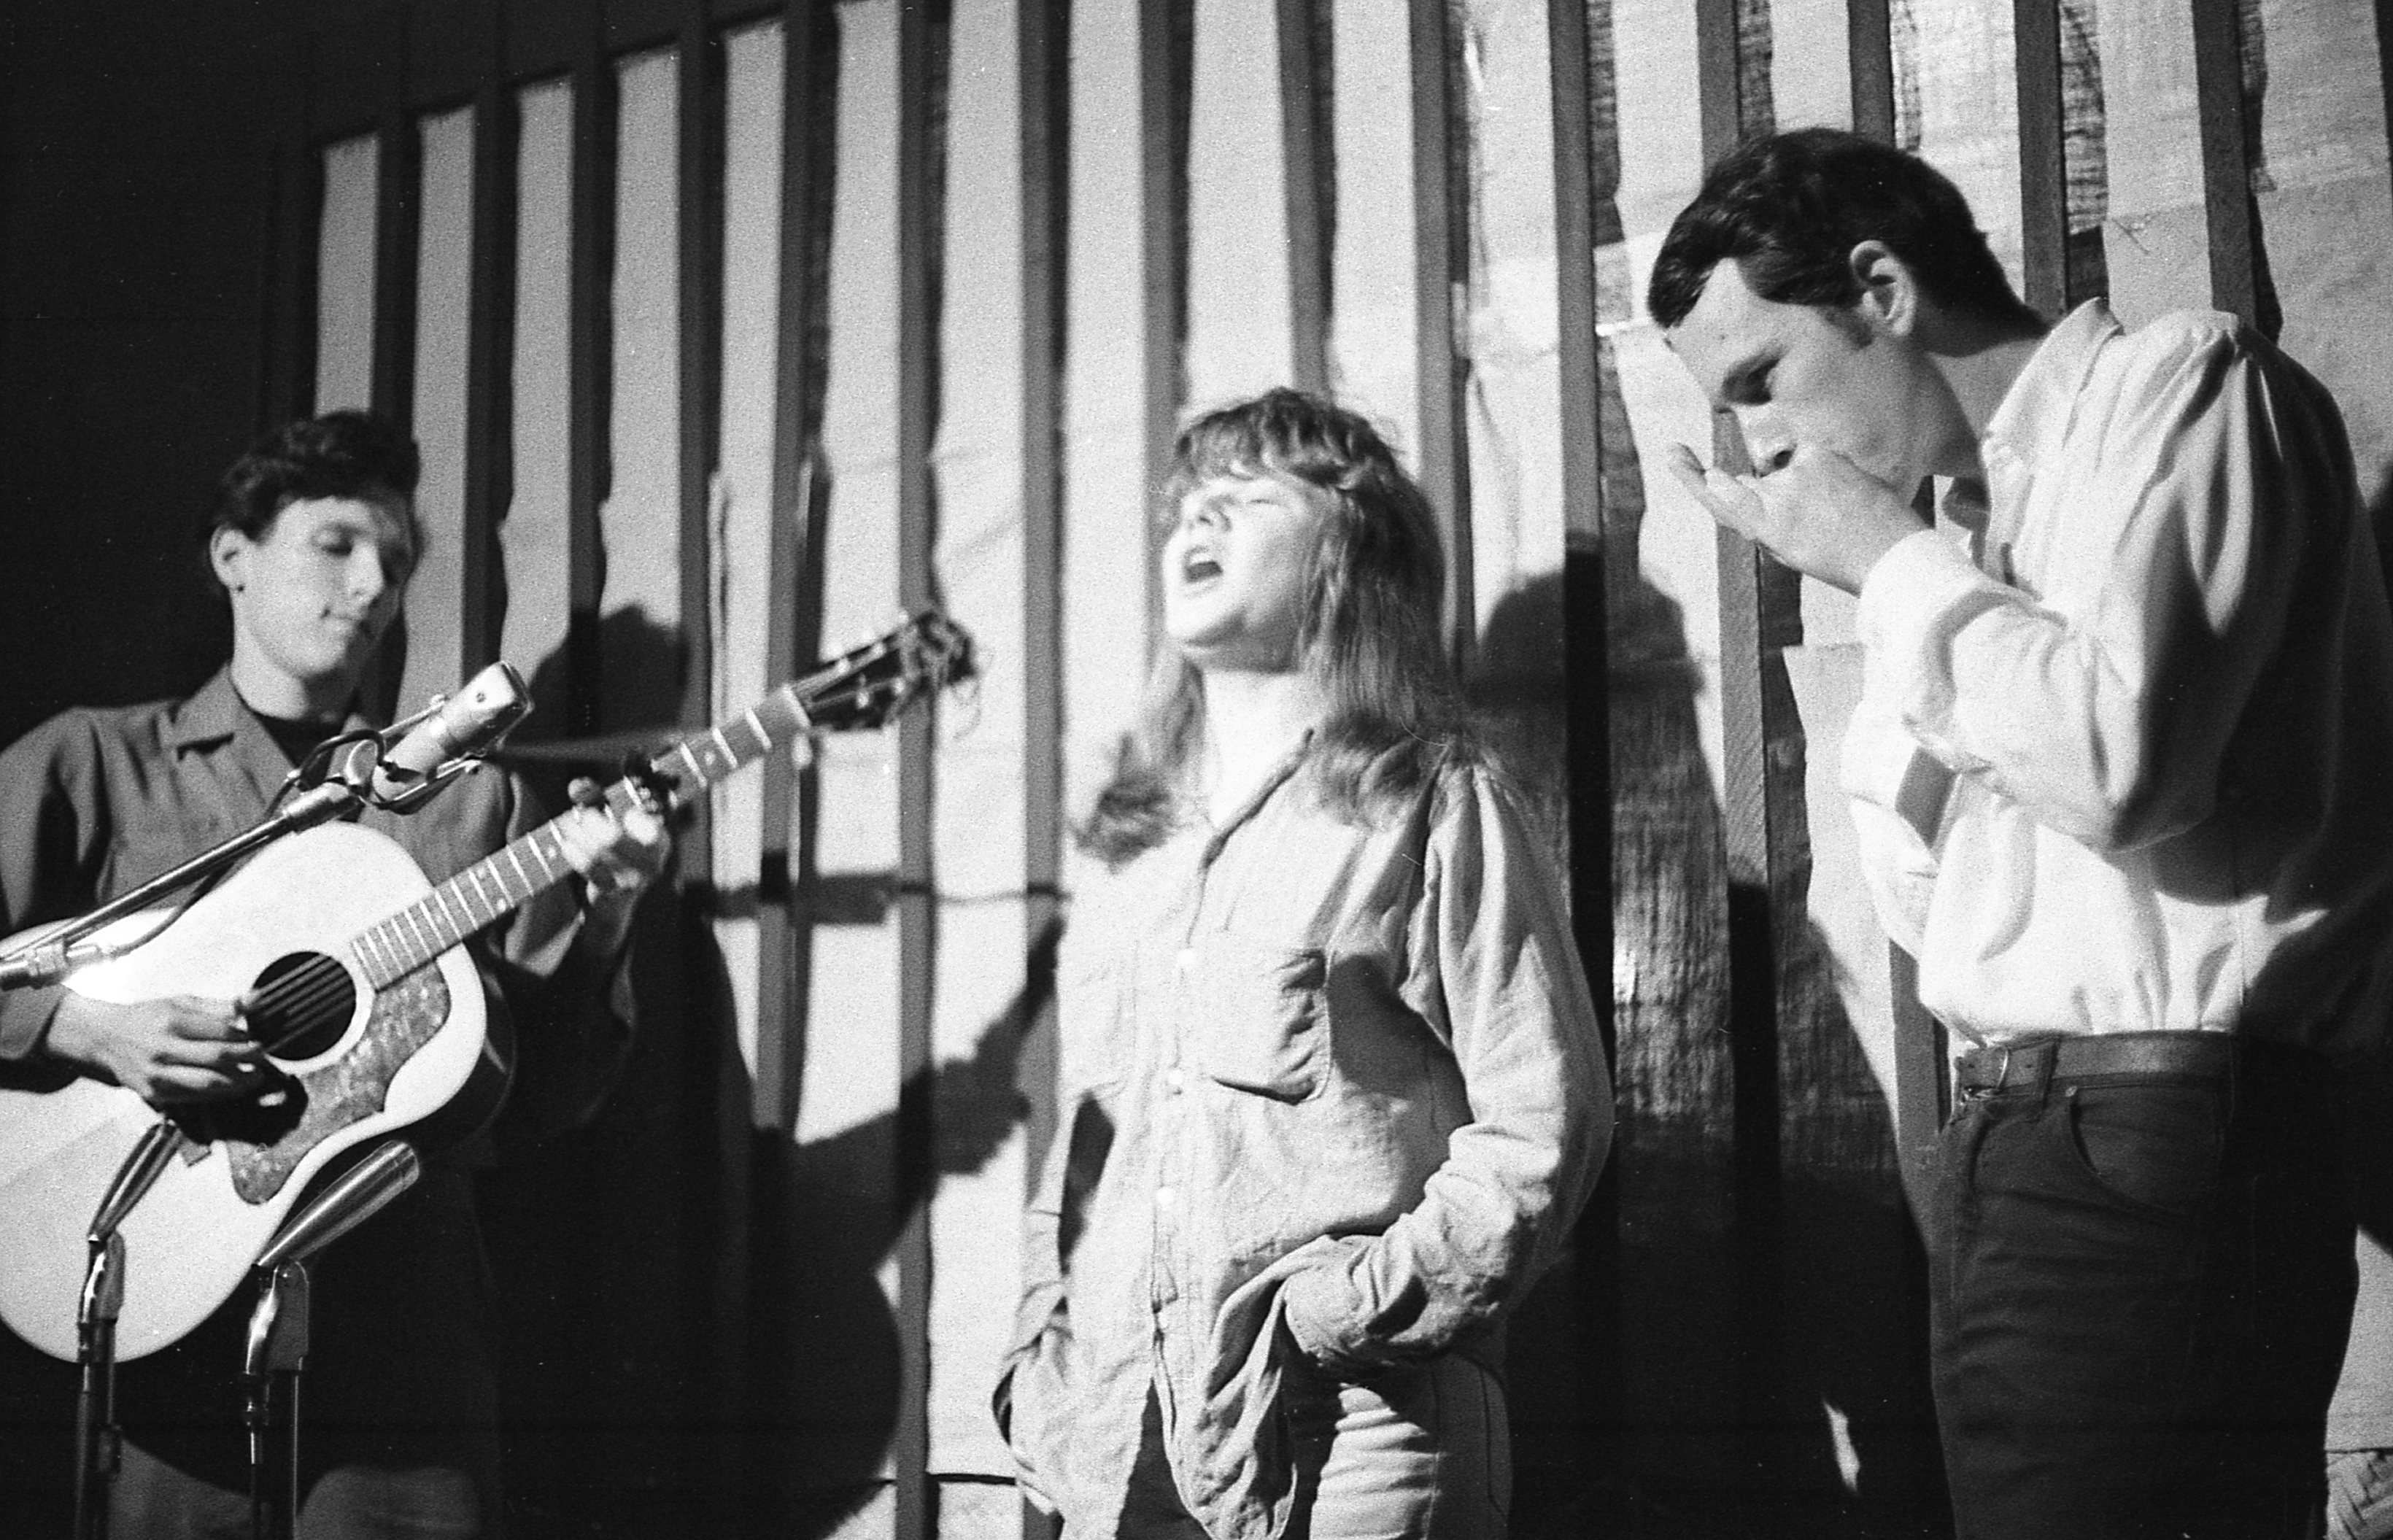 Janis and Jorma at the Folk Theatre, San Jose, 1962. (Photography by Marjorie Alette)